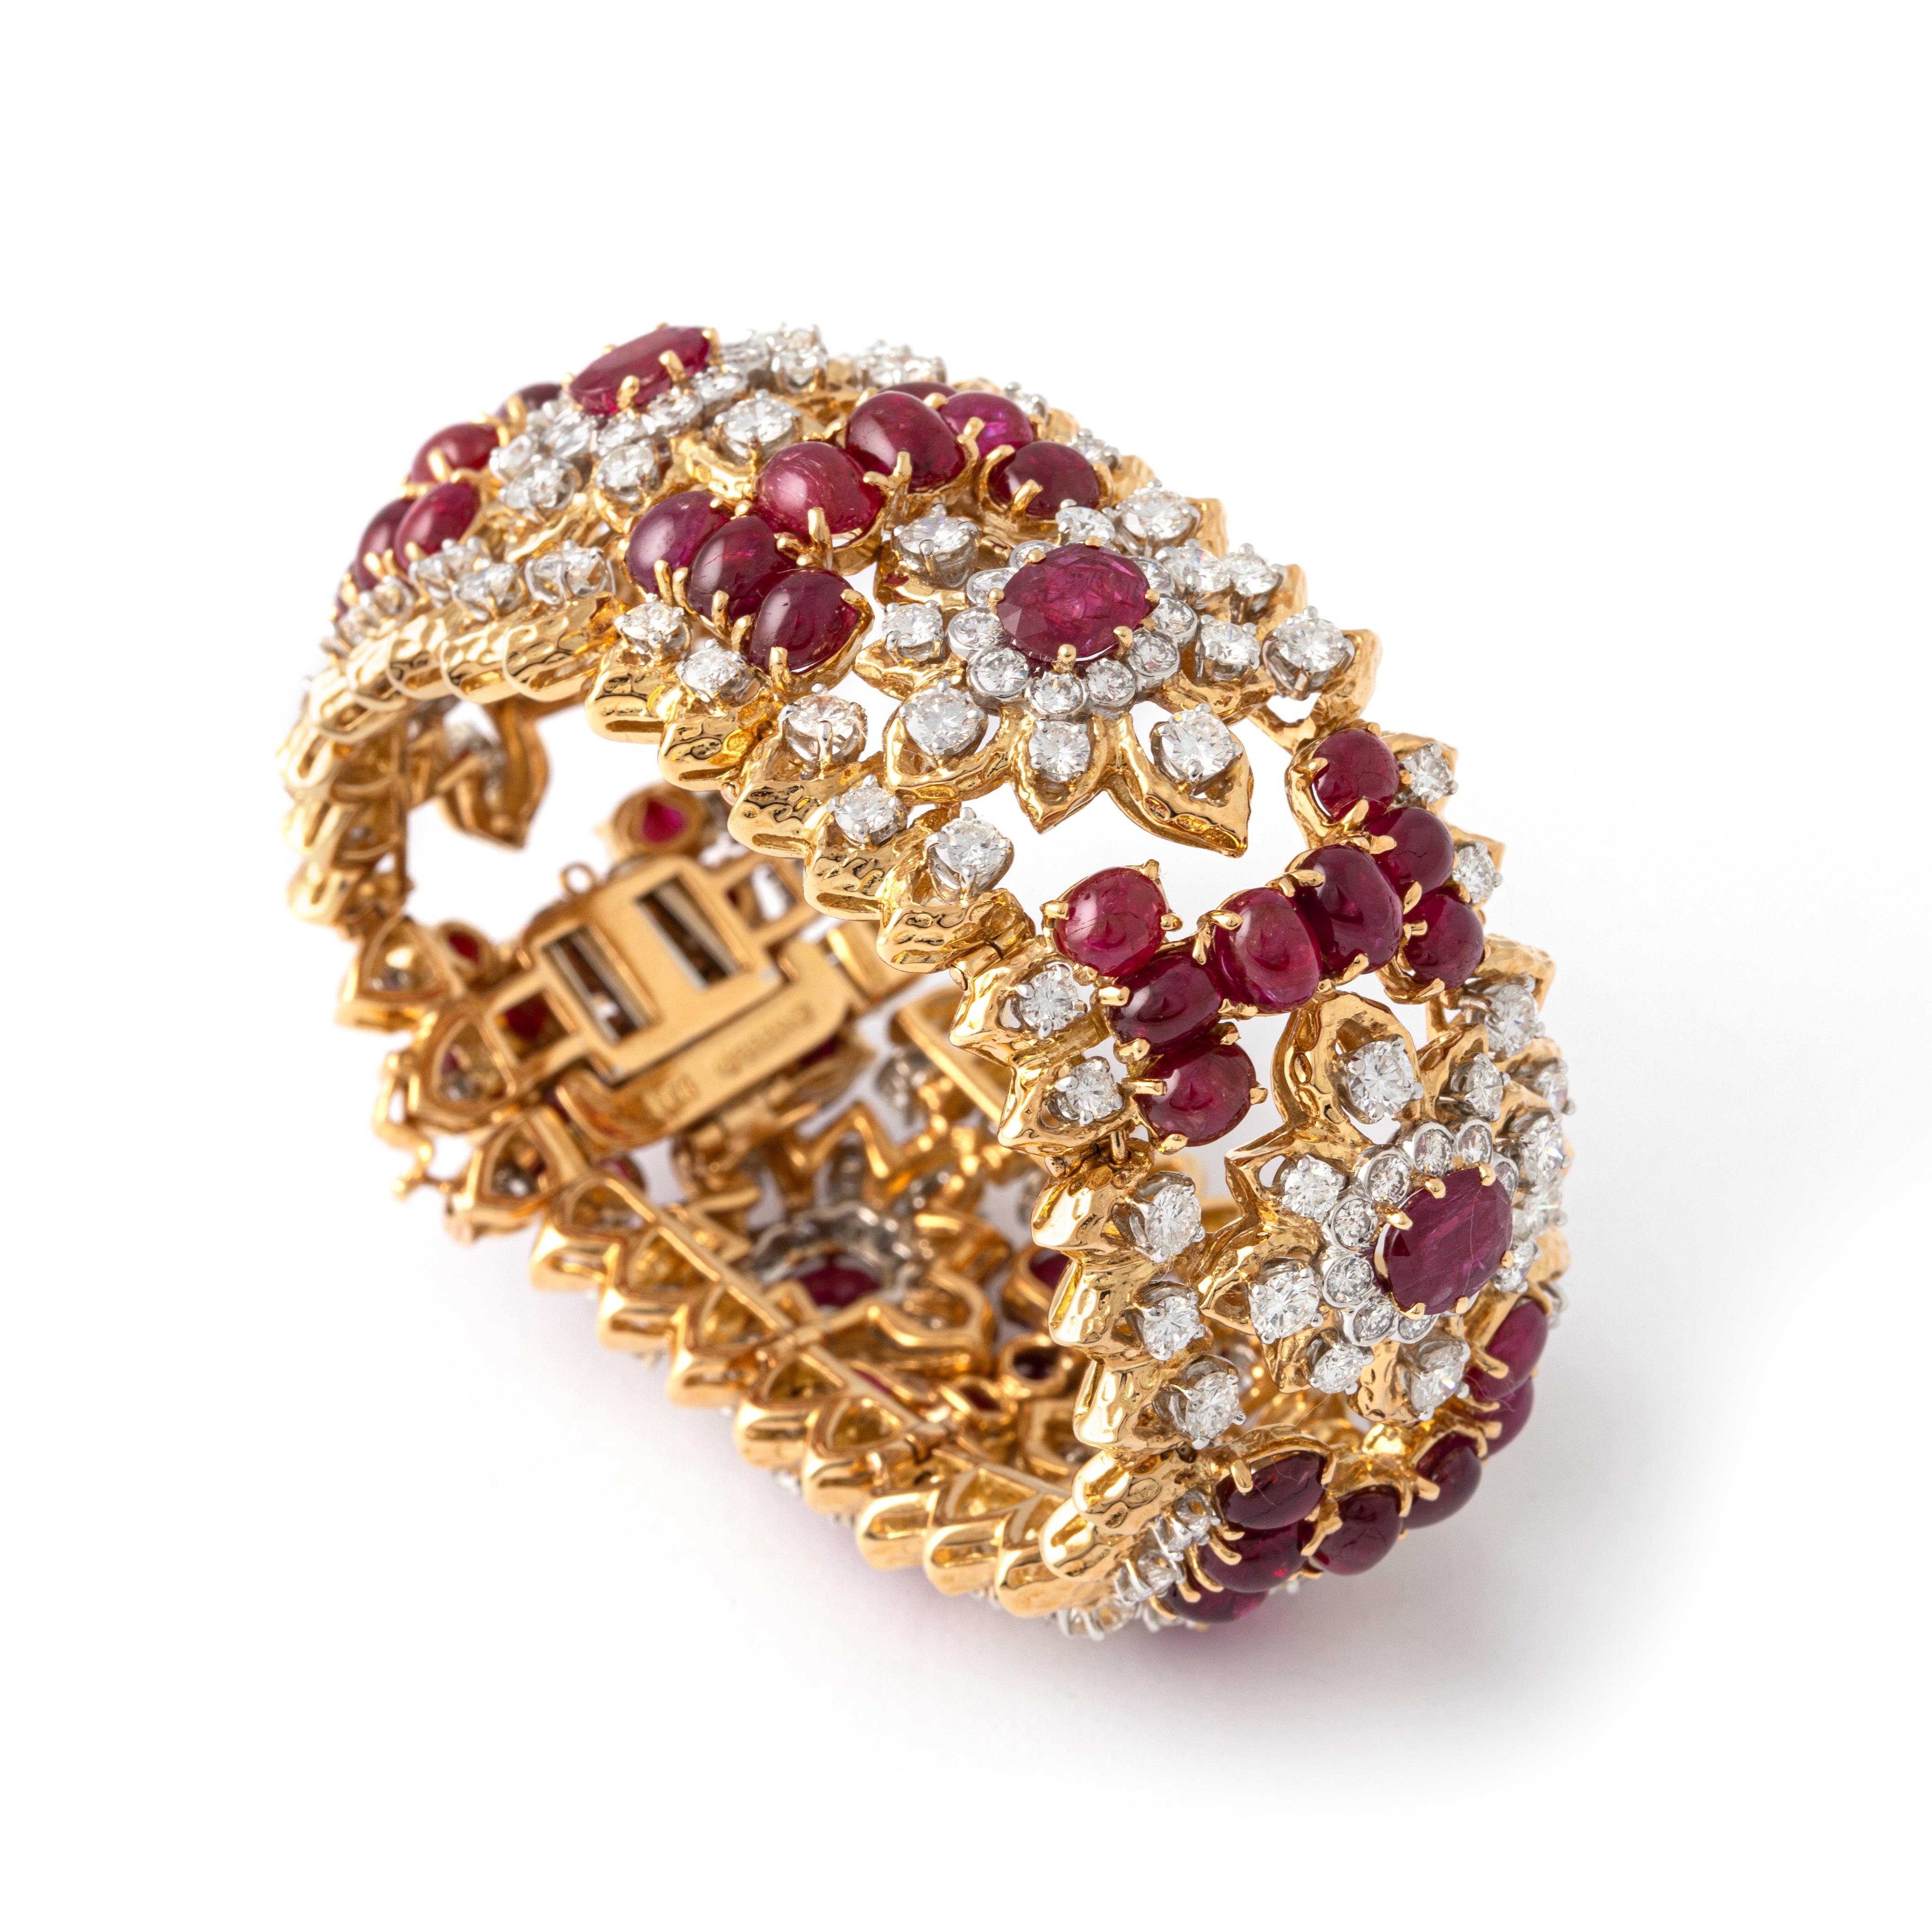 David Webb 18K gold, ruby and diamond bracelet.
The wide openwork strap set with oval rubies weighing approximately 5.00 carats cabochon rubies and round diamonds weighing approximately 15.15 carats. 
Signed Webb.

Width: 3.00 centimeters.
Length: